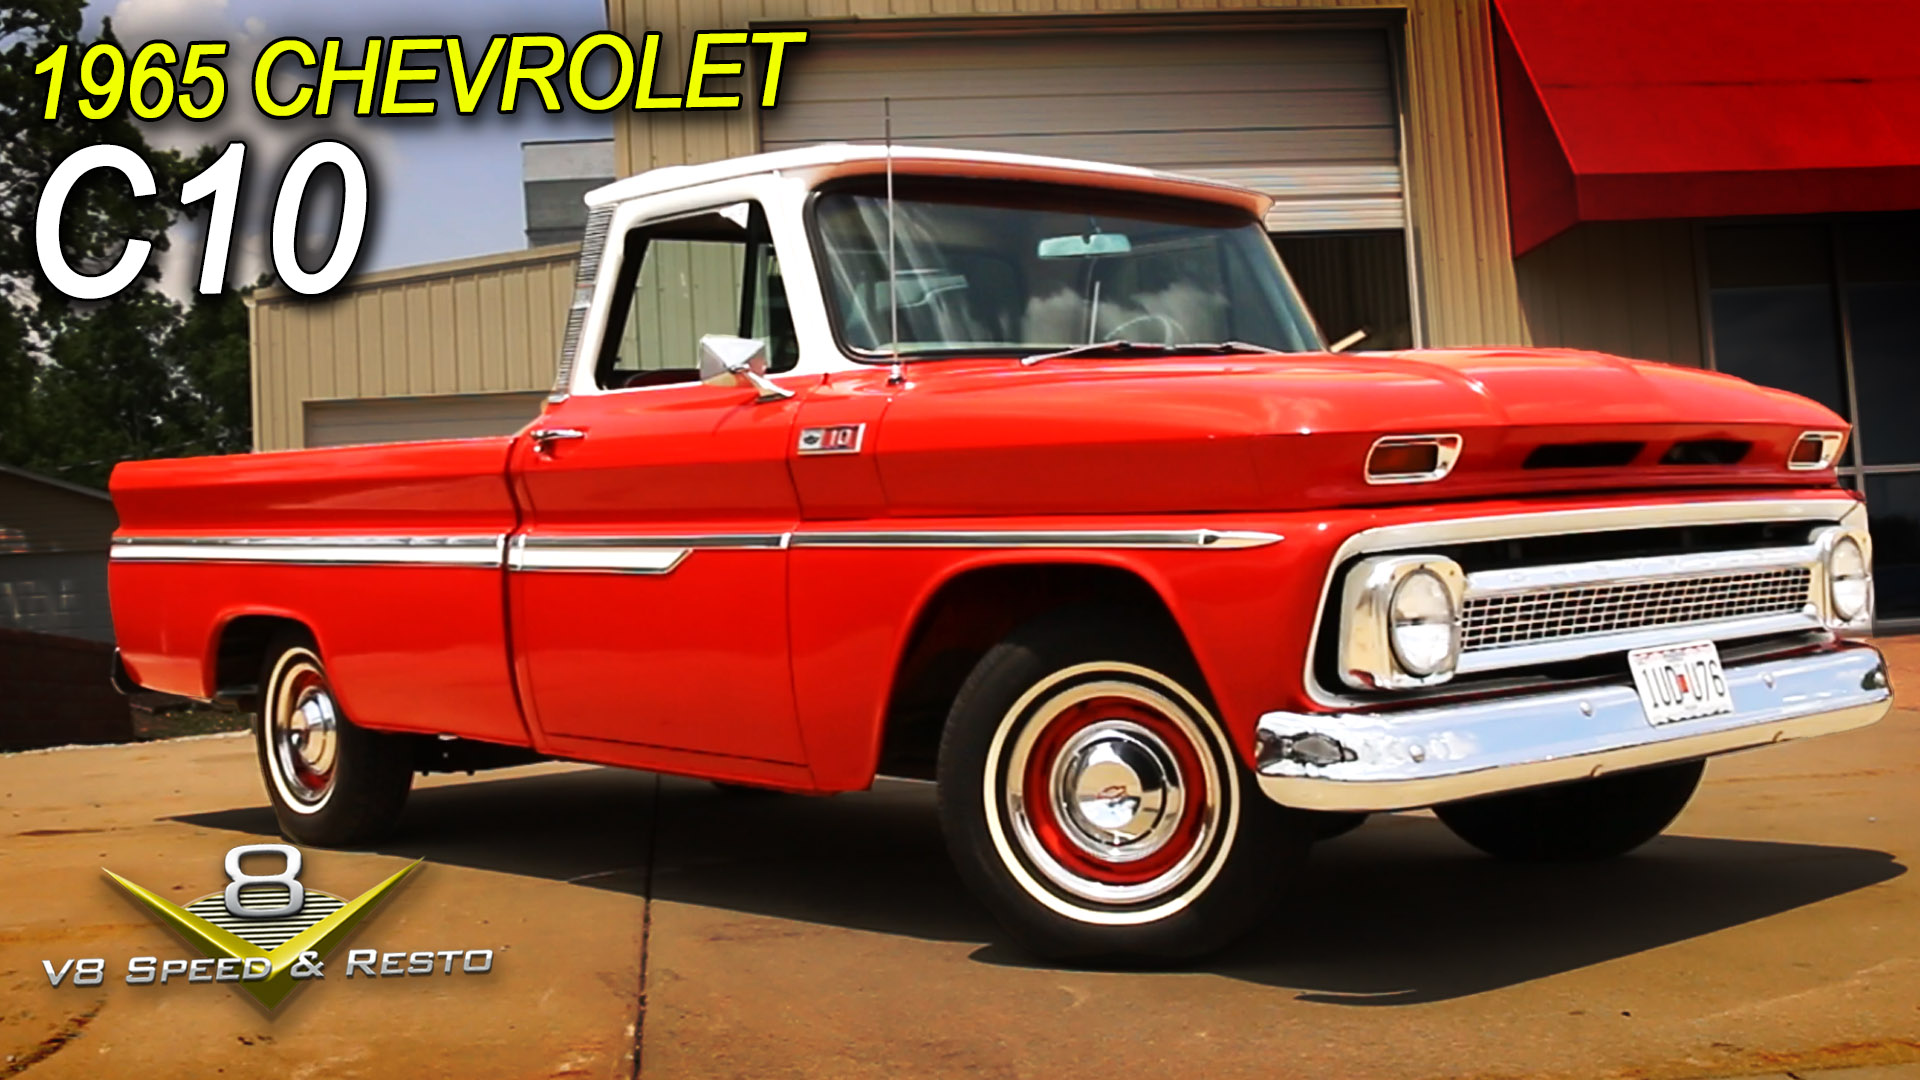 1965 Chevrolet C10 Pickup Truck Feature at V8 Speed and Resto Shop V8TV